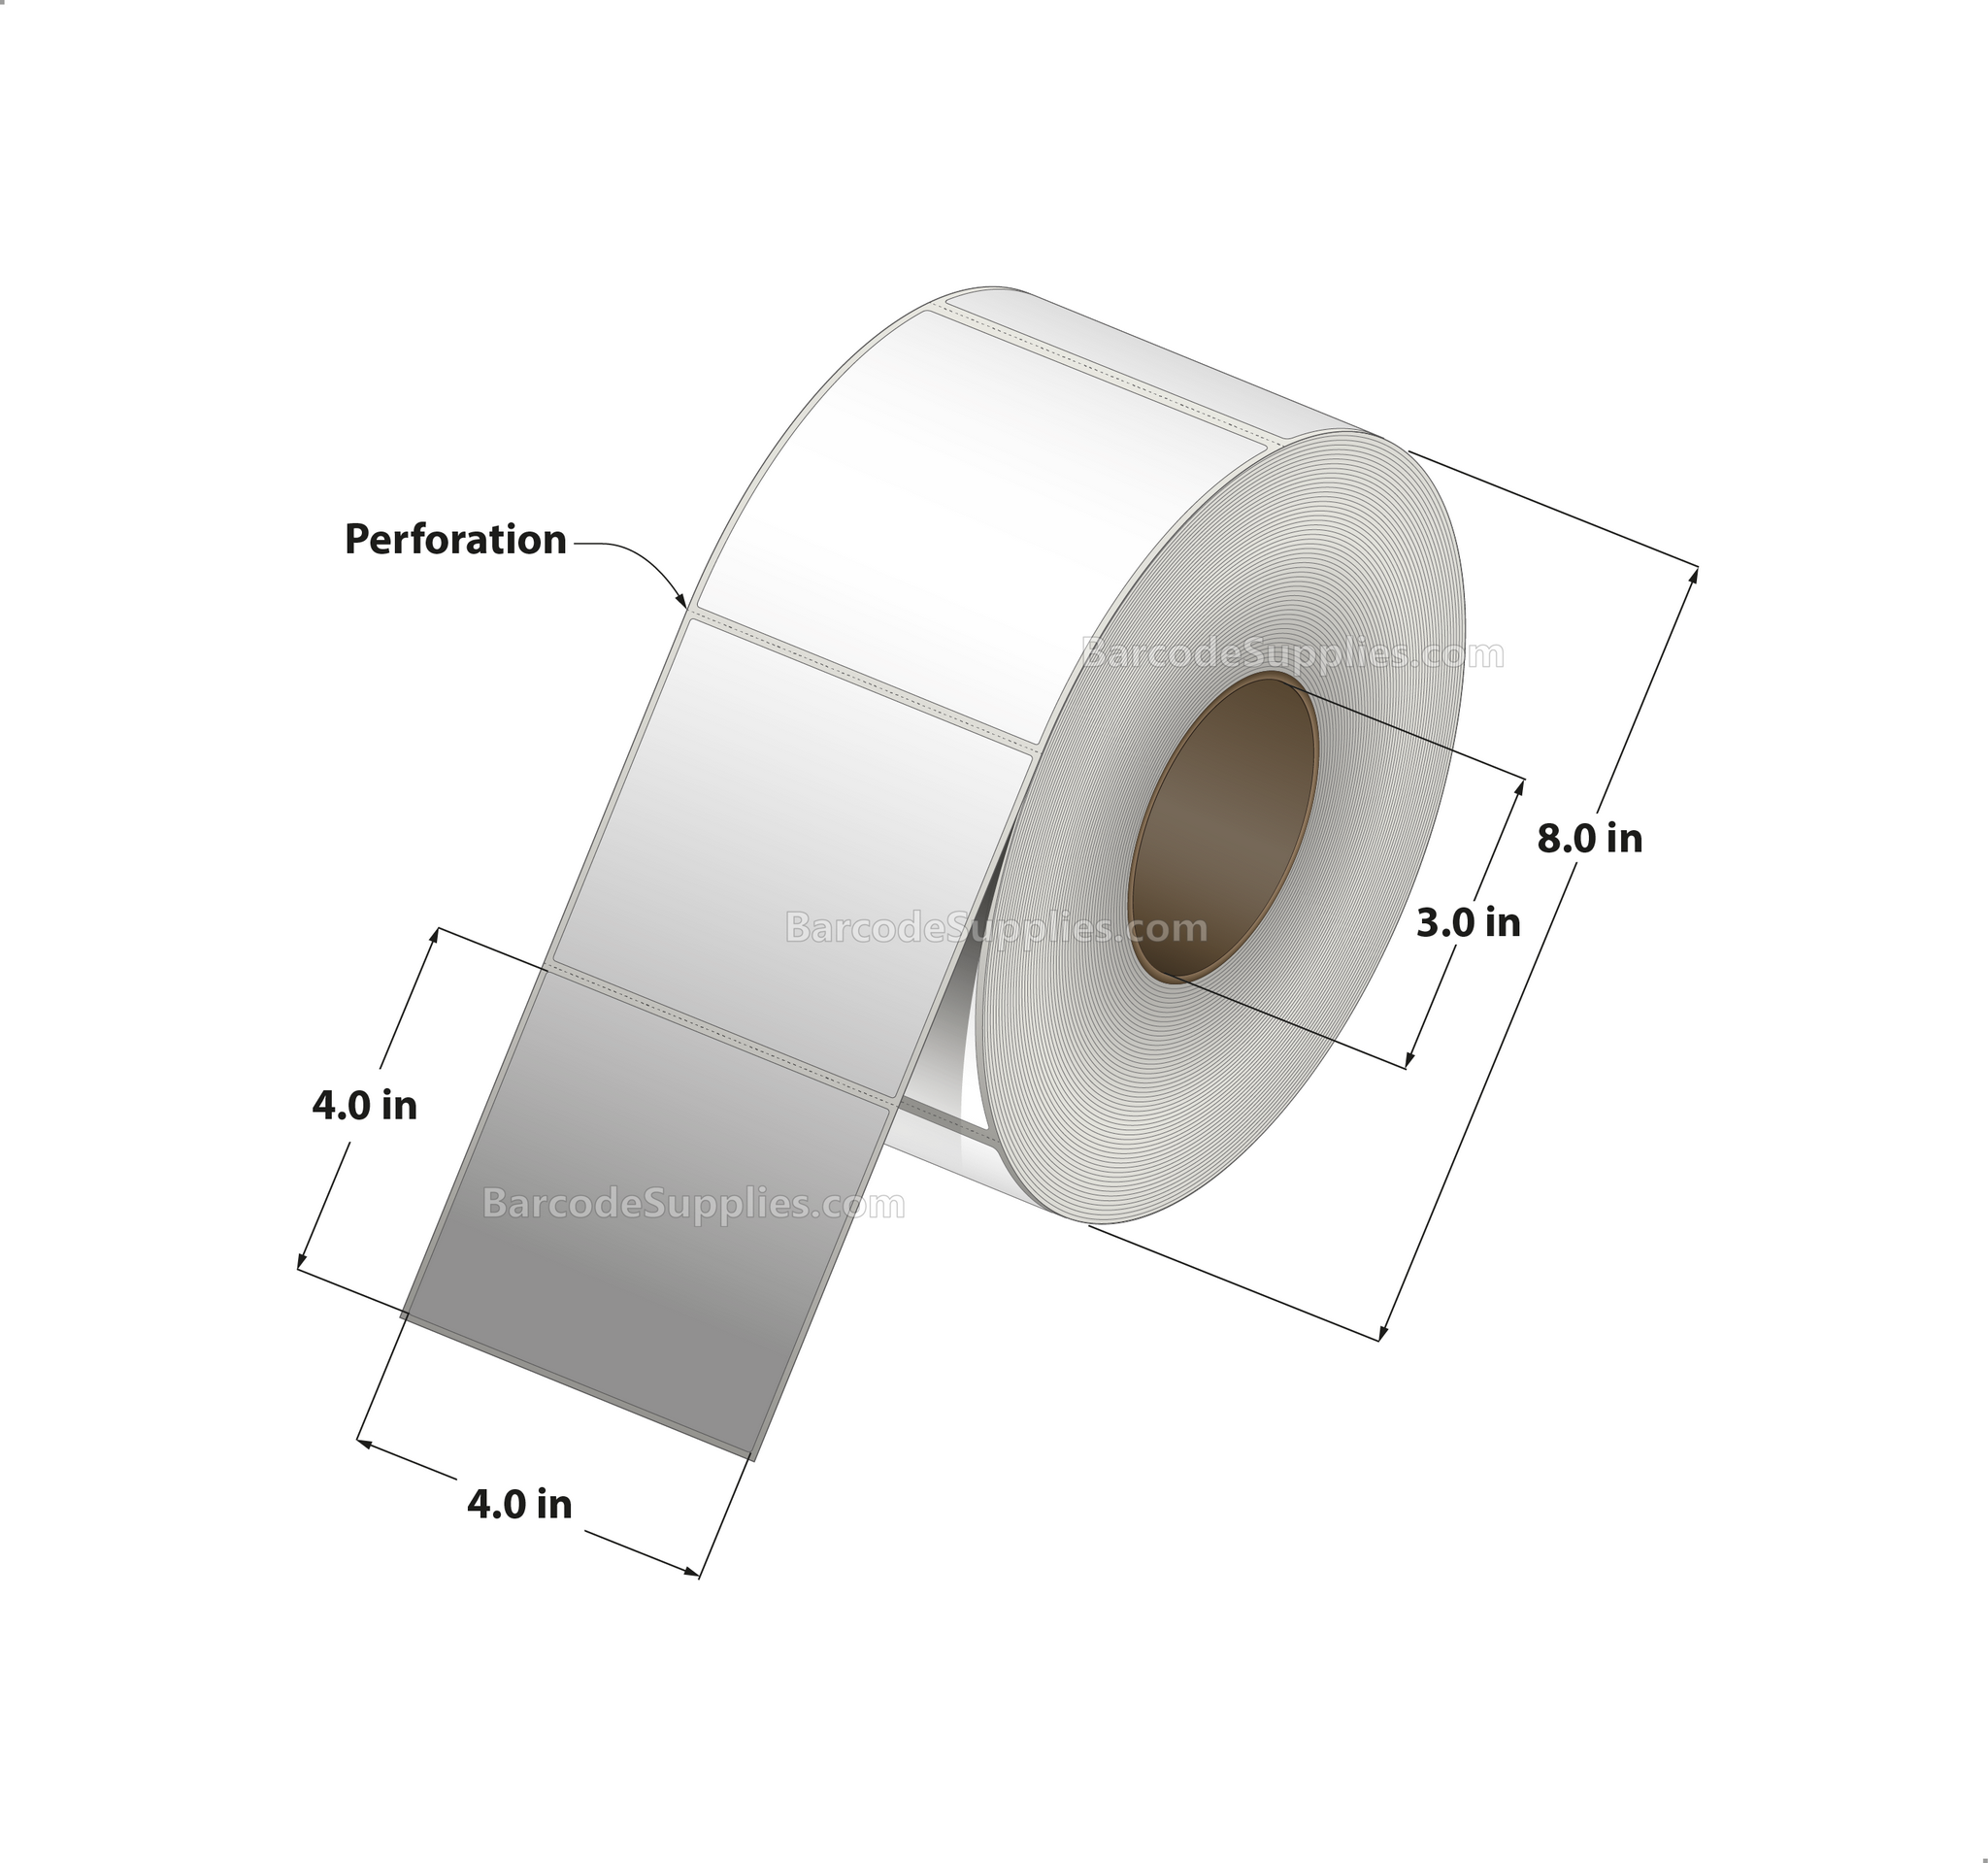 4 x 4 Direct Thermal White Labels With Acrylic Adhesive - Perforated - 1500 Labels Per Roll - Carton Of 4 Rolls - 6000 Labels Total - MPN: RD-4-4-1500-3 - BarcodeSource, Inc.